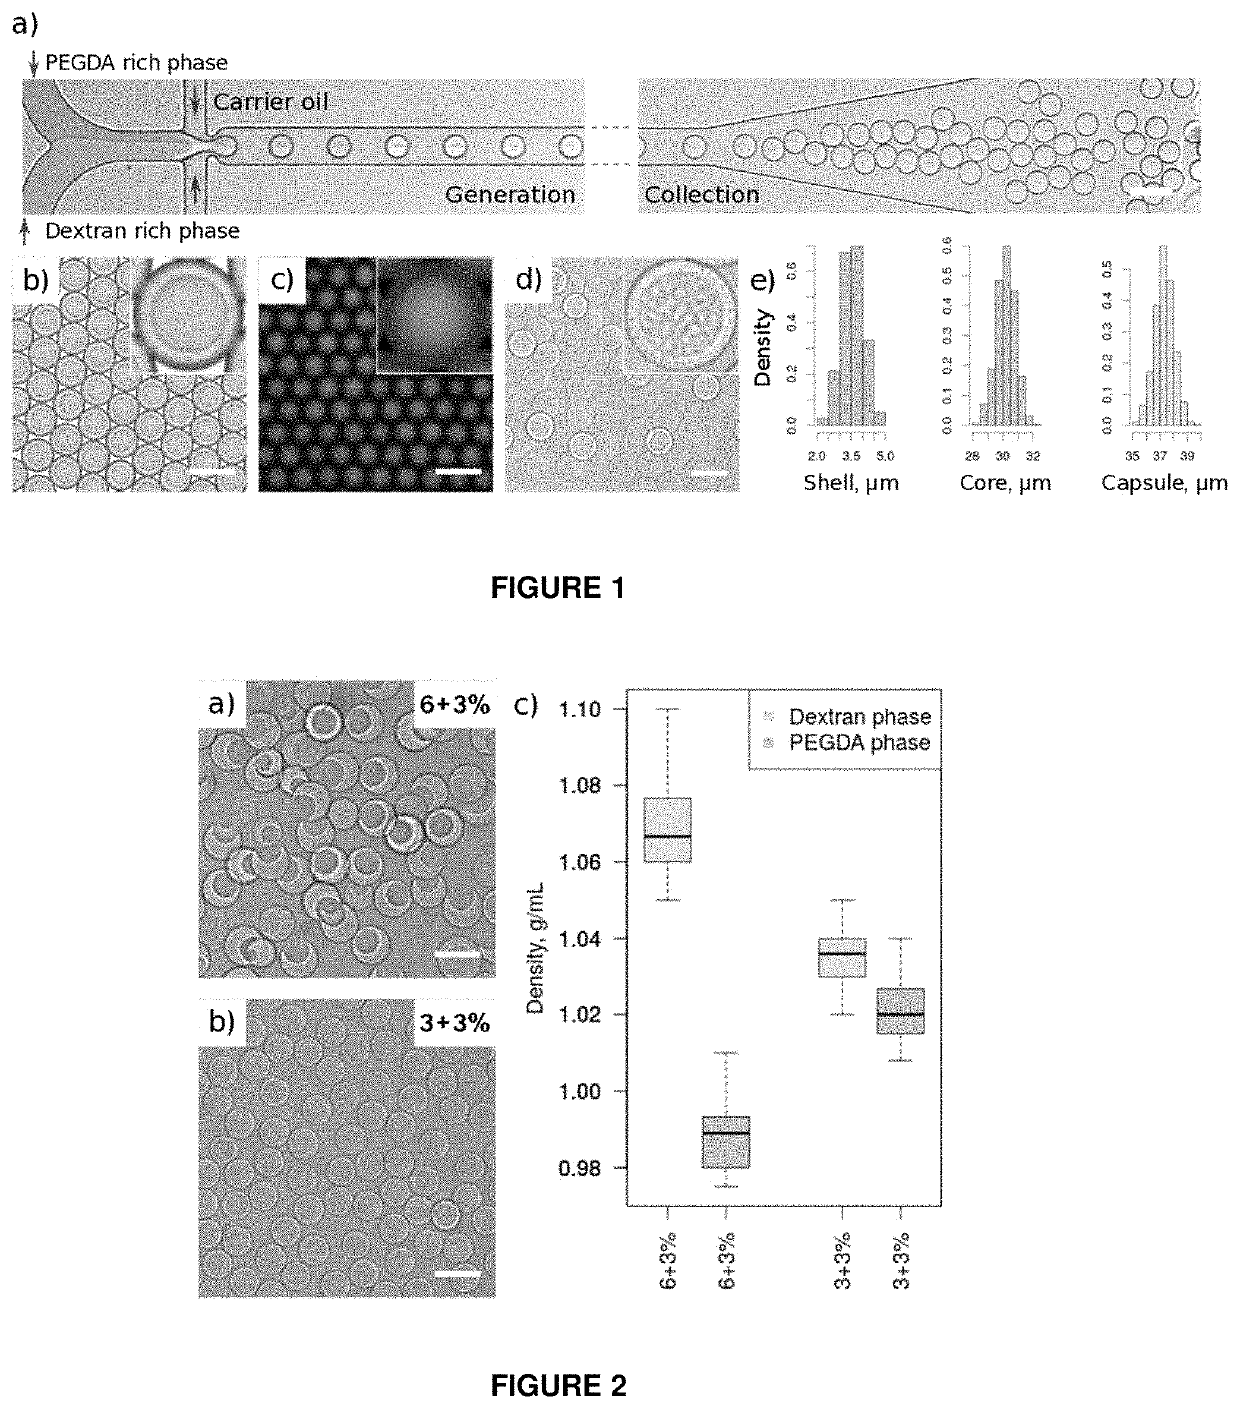 Systems and methods for encapsulation and multi-step processing of biological samples